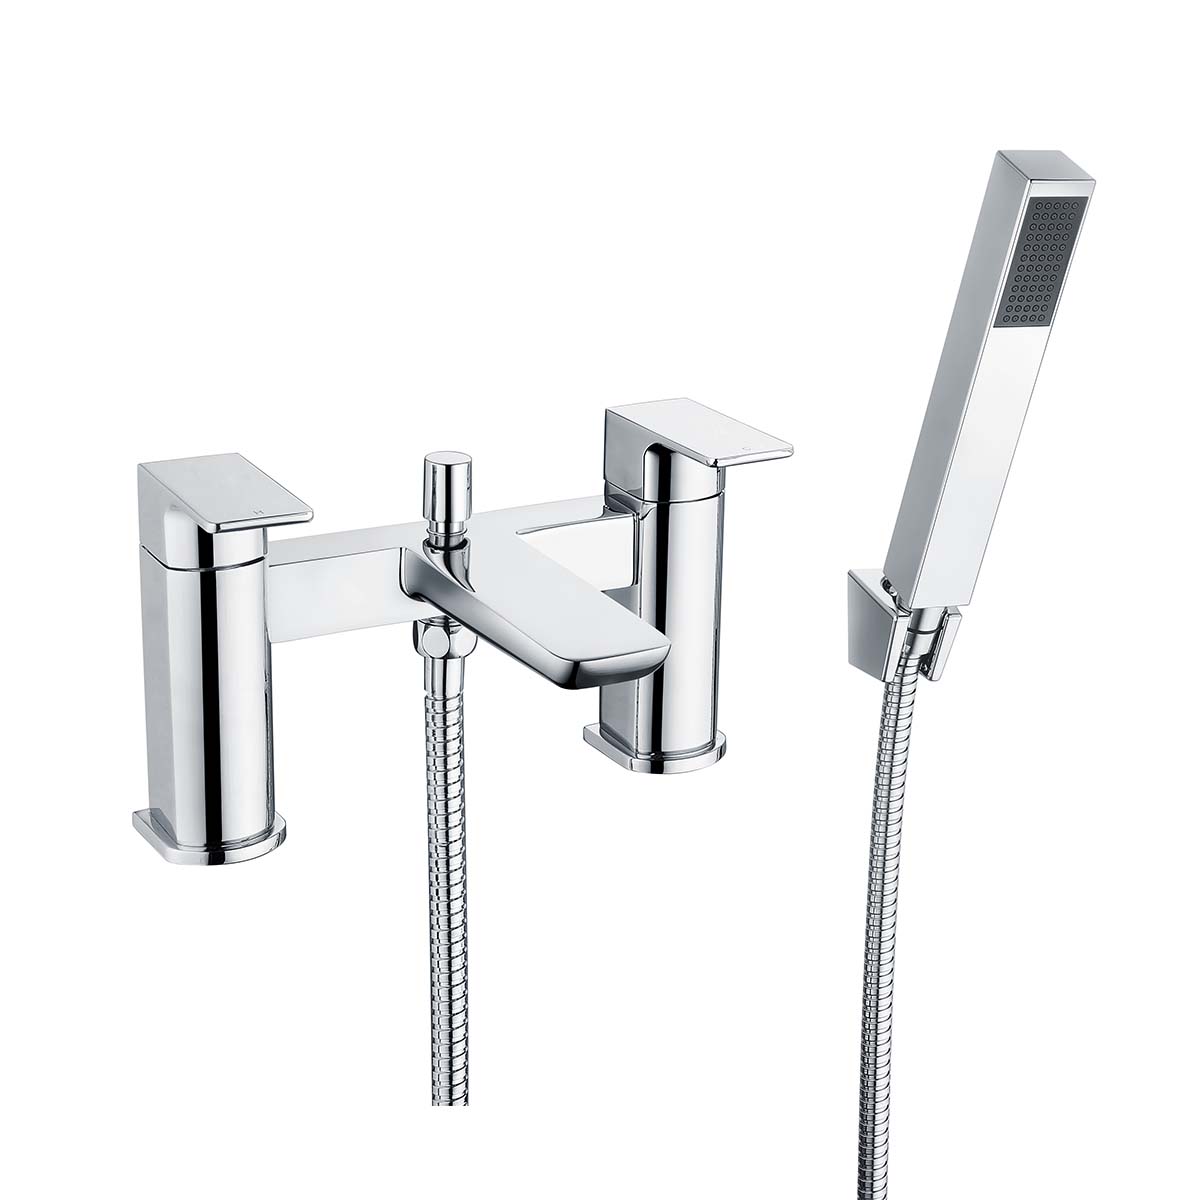 Deluxe Greenwich Deck Mounted Bath Shower Mixer With Handset Chrome